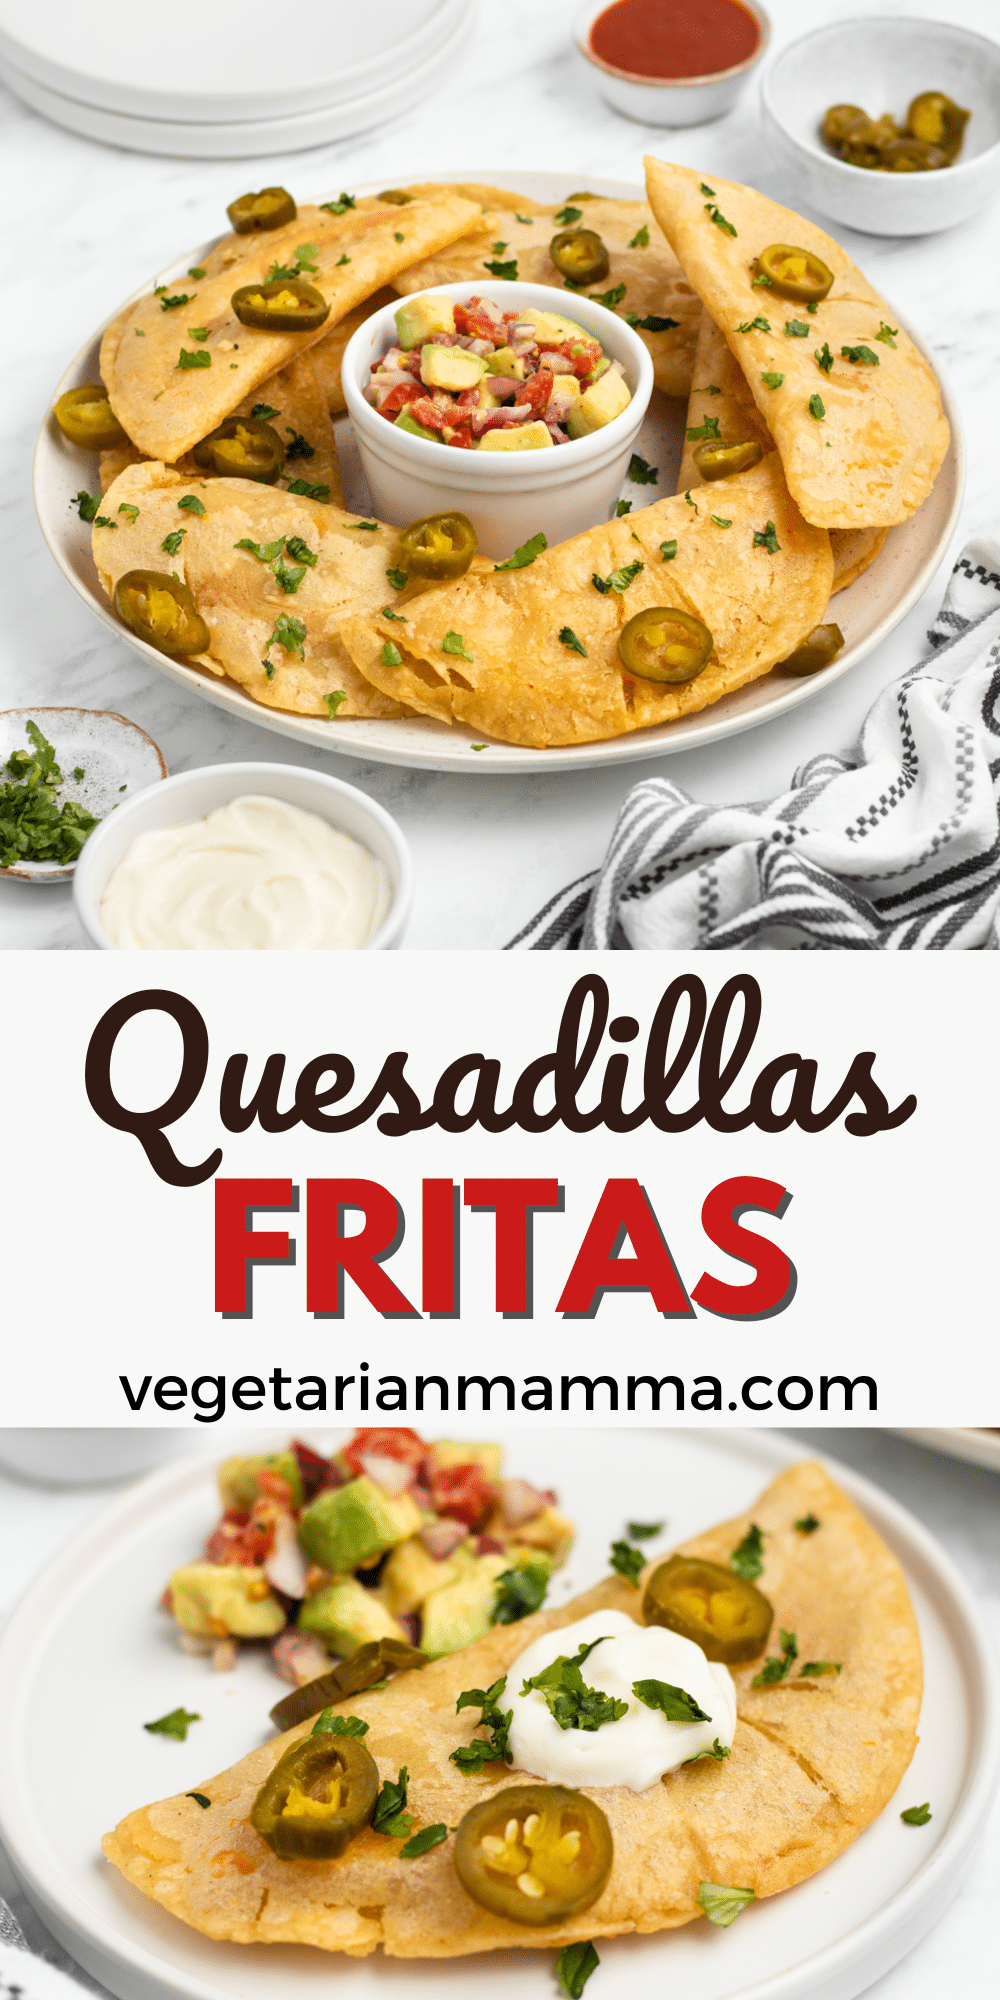 Quesadillas Fritas are a classic Mexican street food, made with a homemade masa tortilla stuffed with melty cheese, and fried until crispy and amazing.